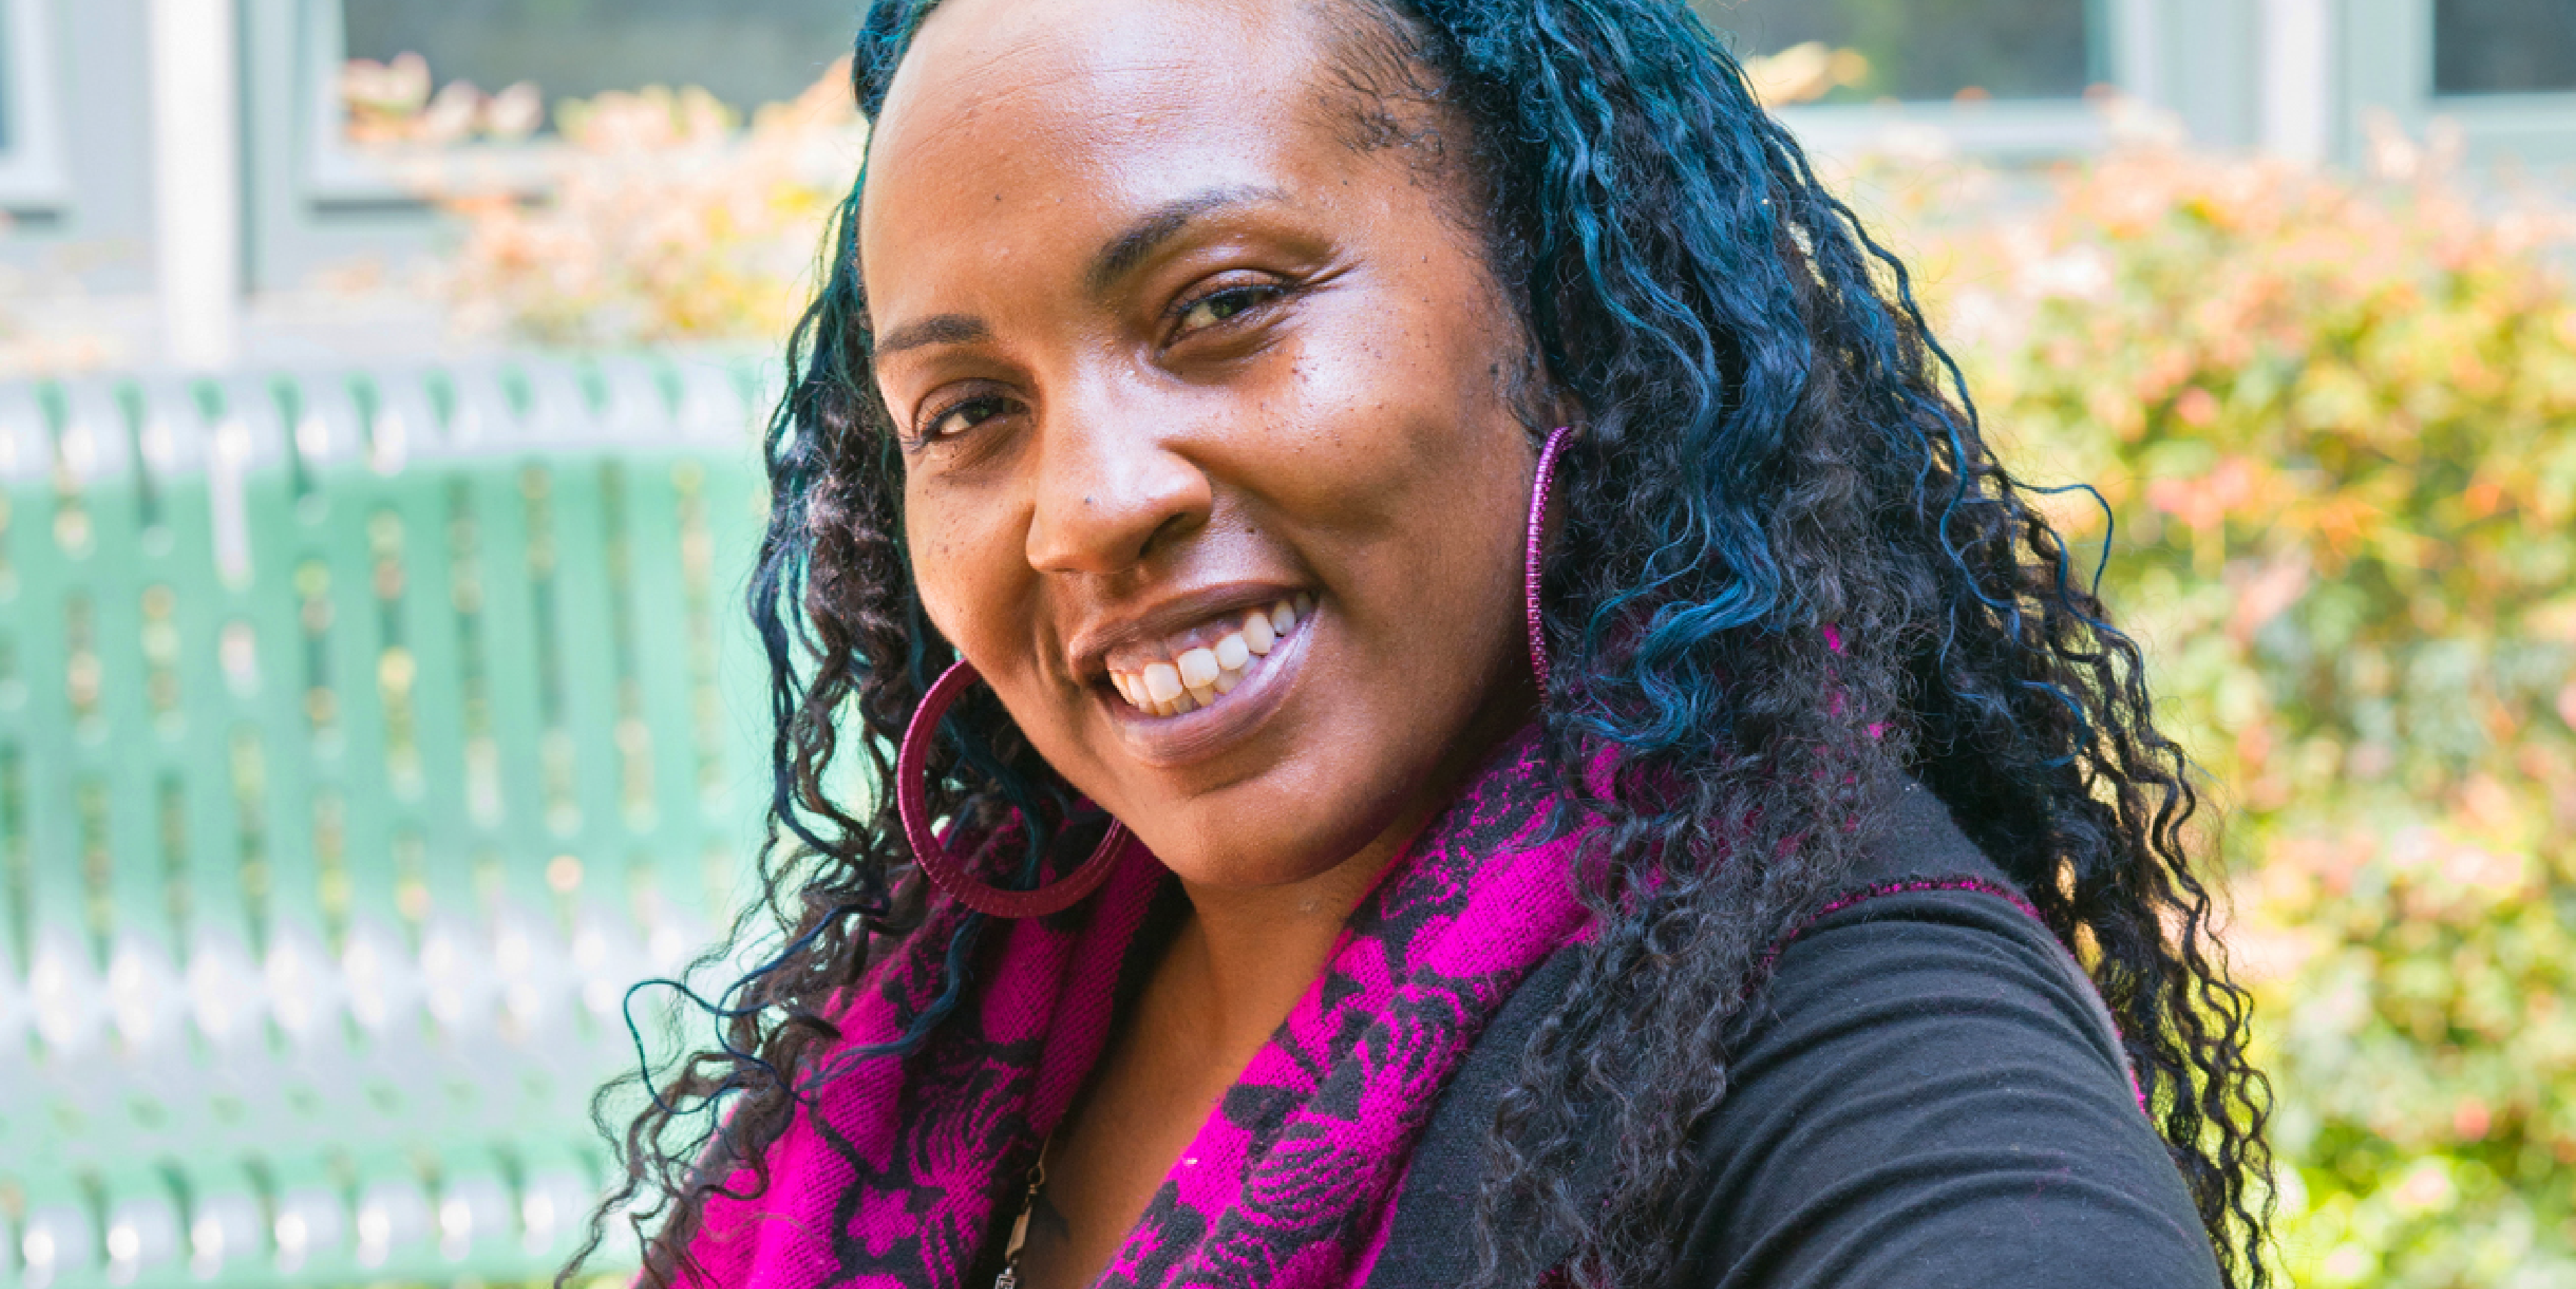 Headshot of smiling woman, Kai Bluford, who is our Resident Services Coordinator